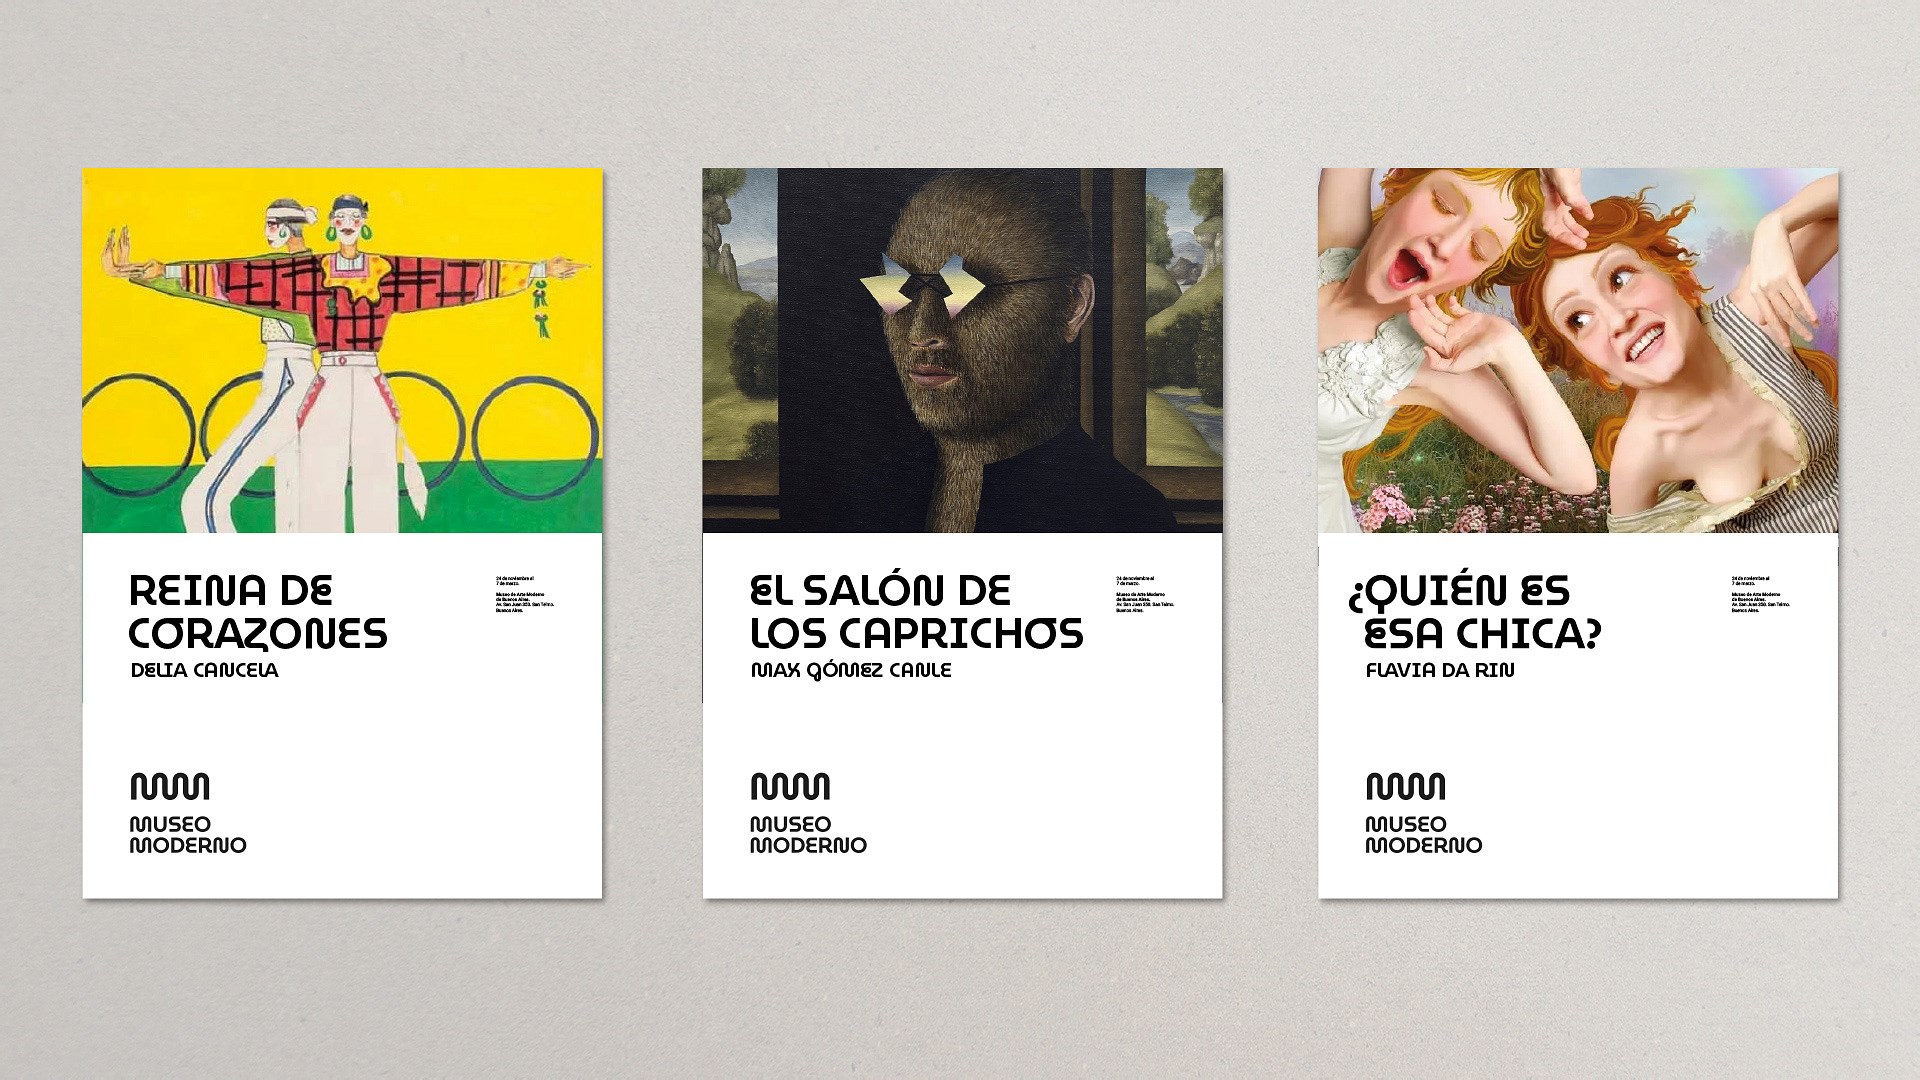 museo_moderno_buenos_aires_posters_smaller.jpg